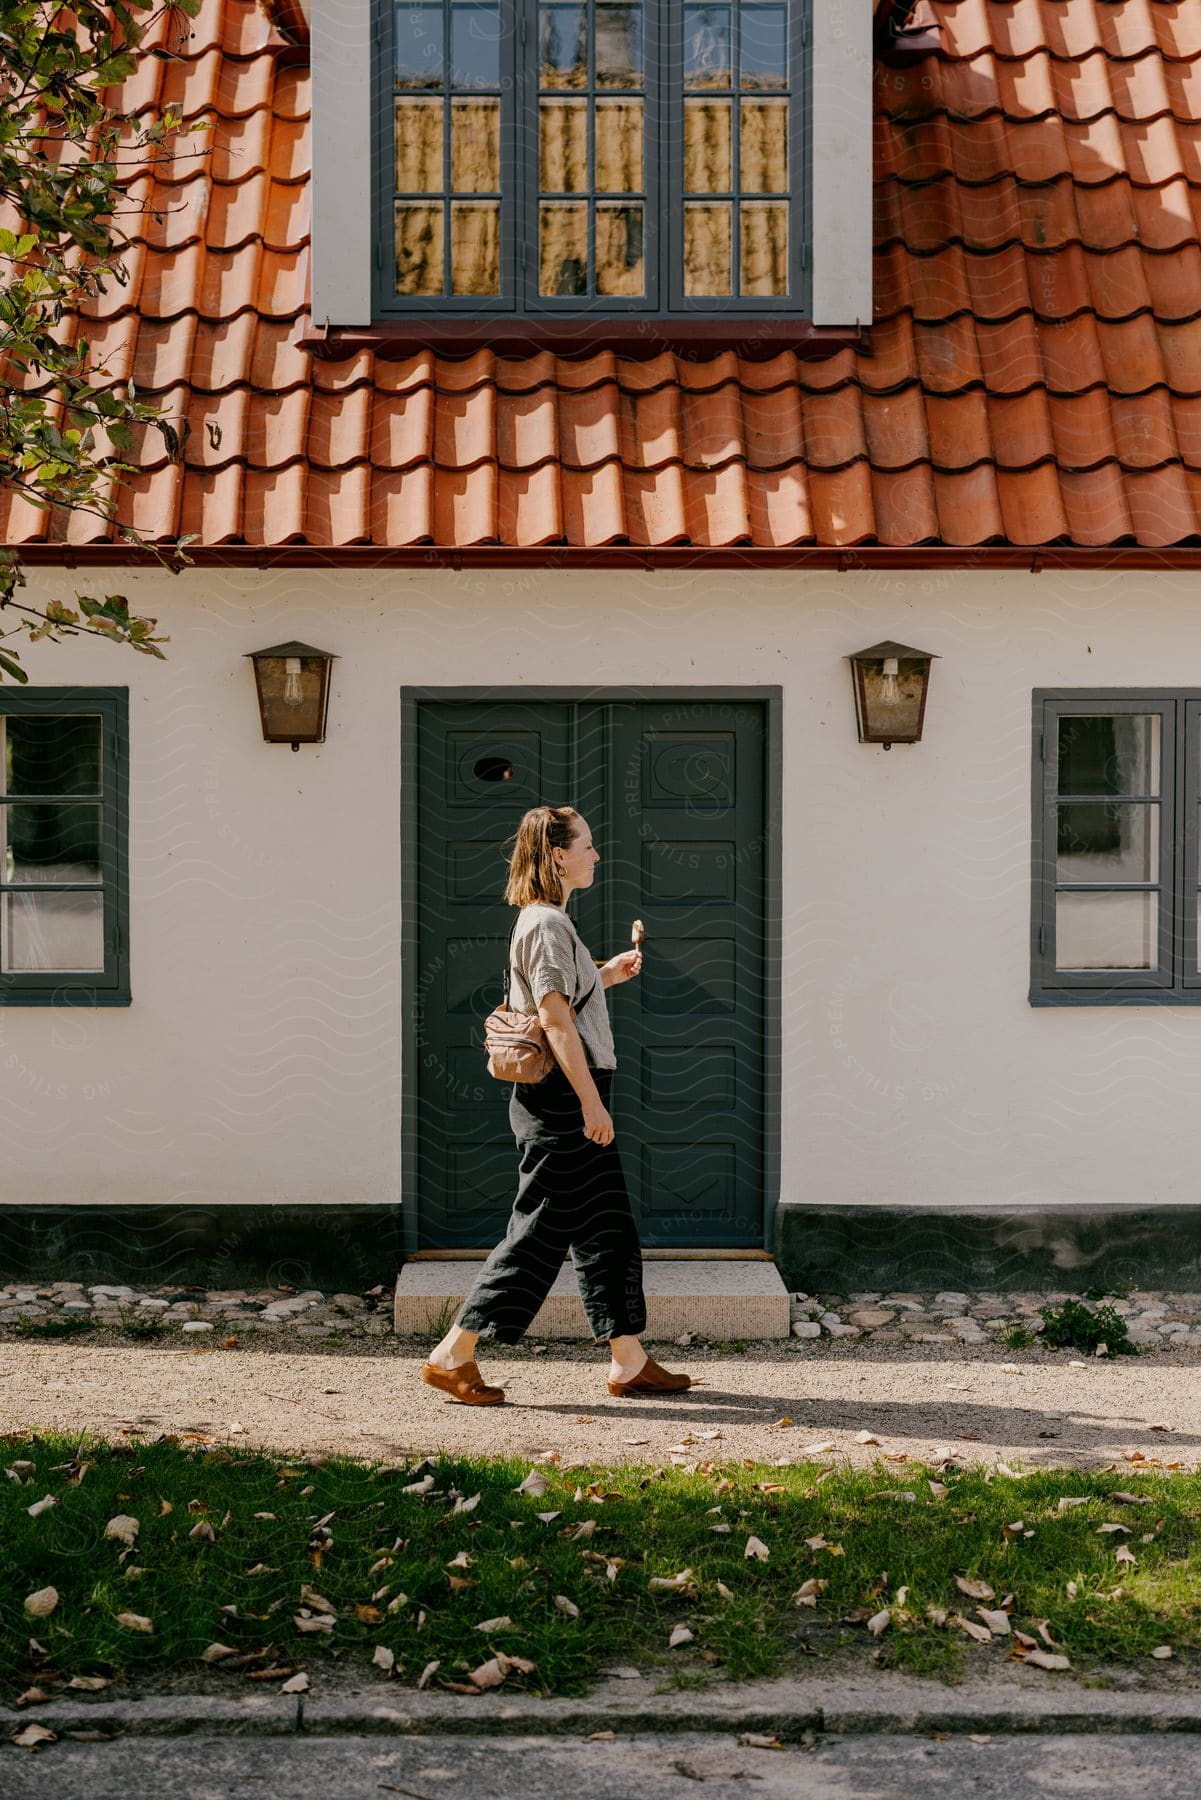 A lady is walking past the front door of a home.